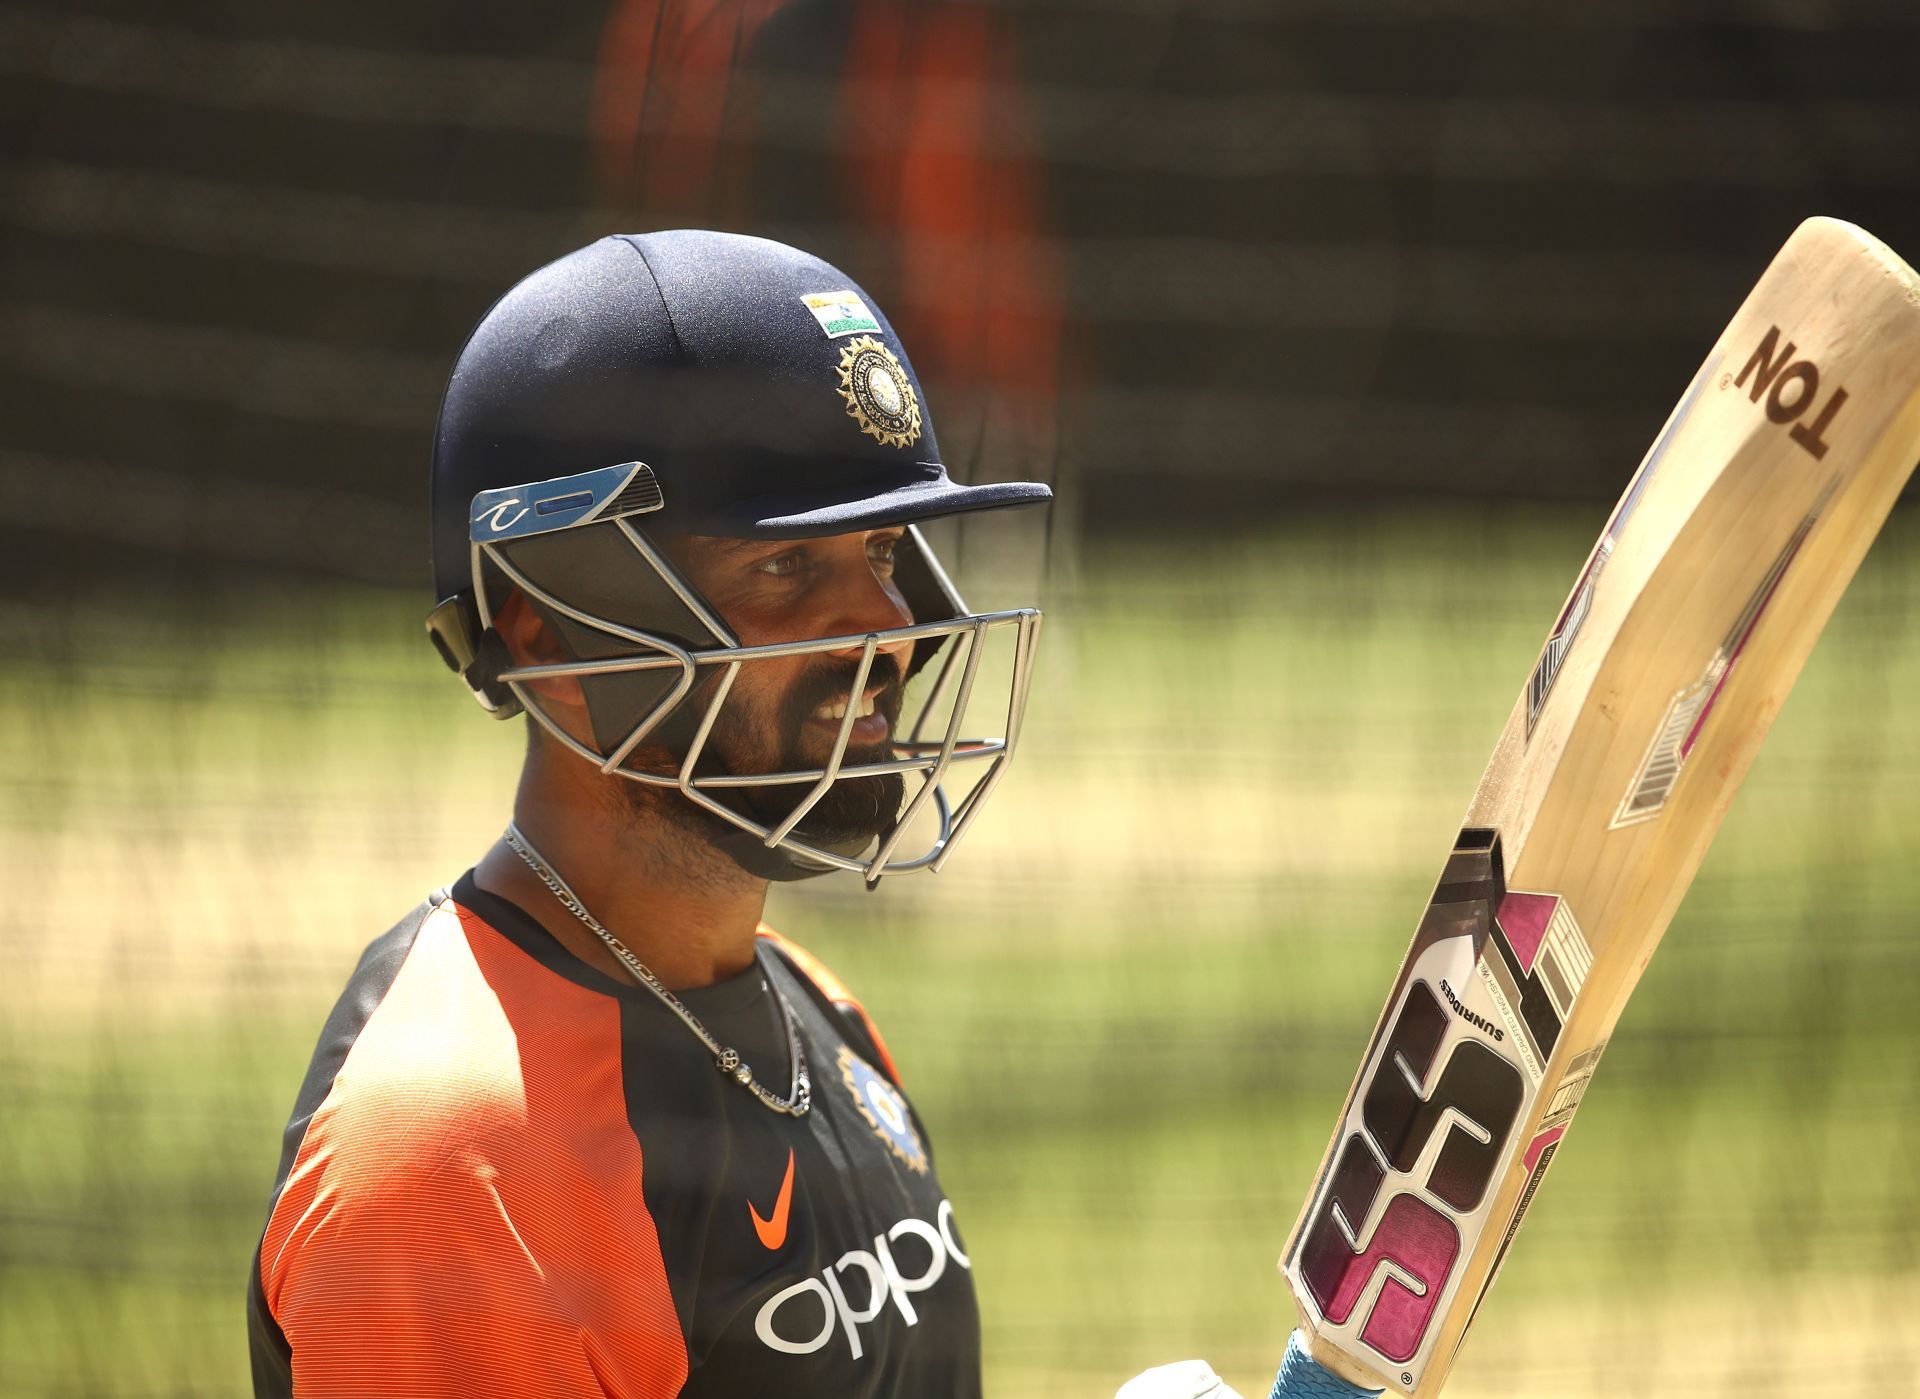 Murali Vijay held the record for the highest score by an Indian in the IPL for long (File Image).